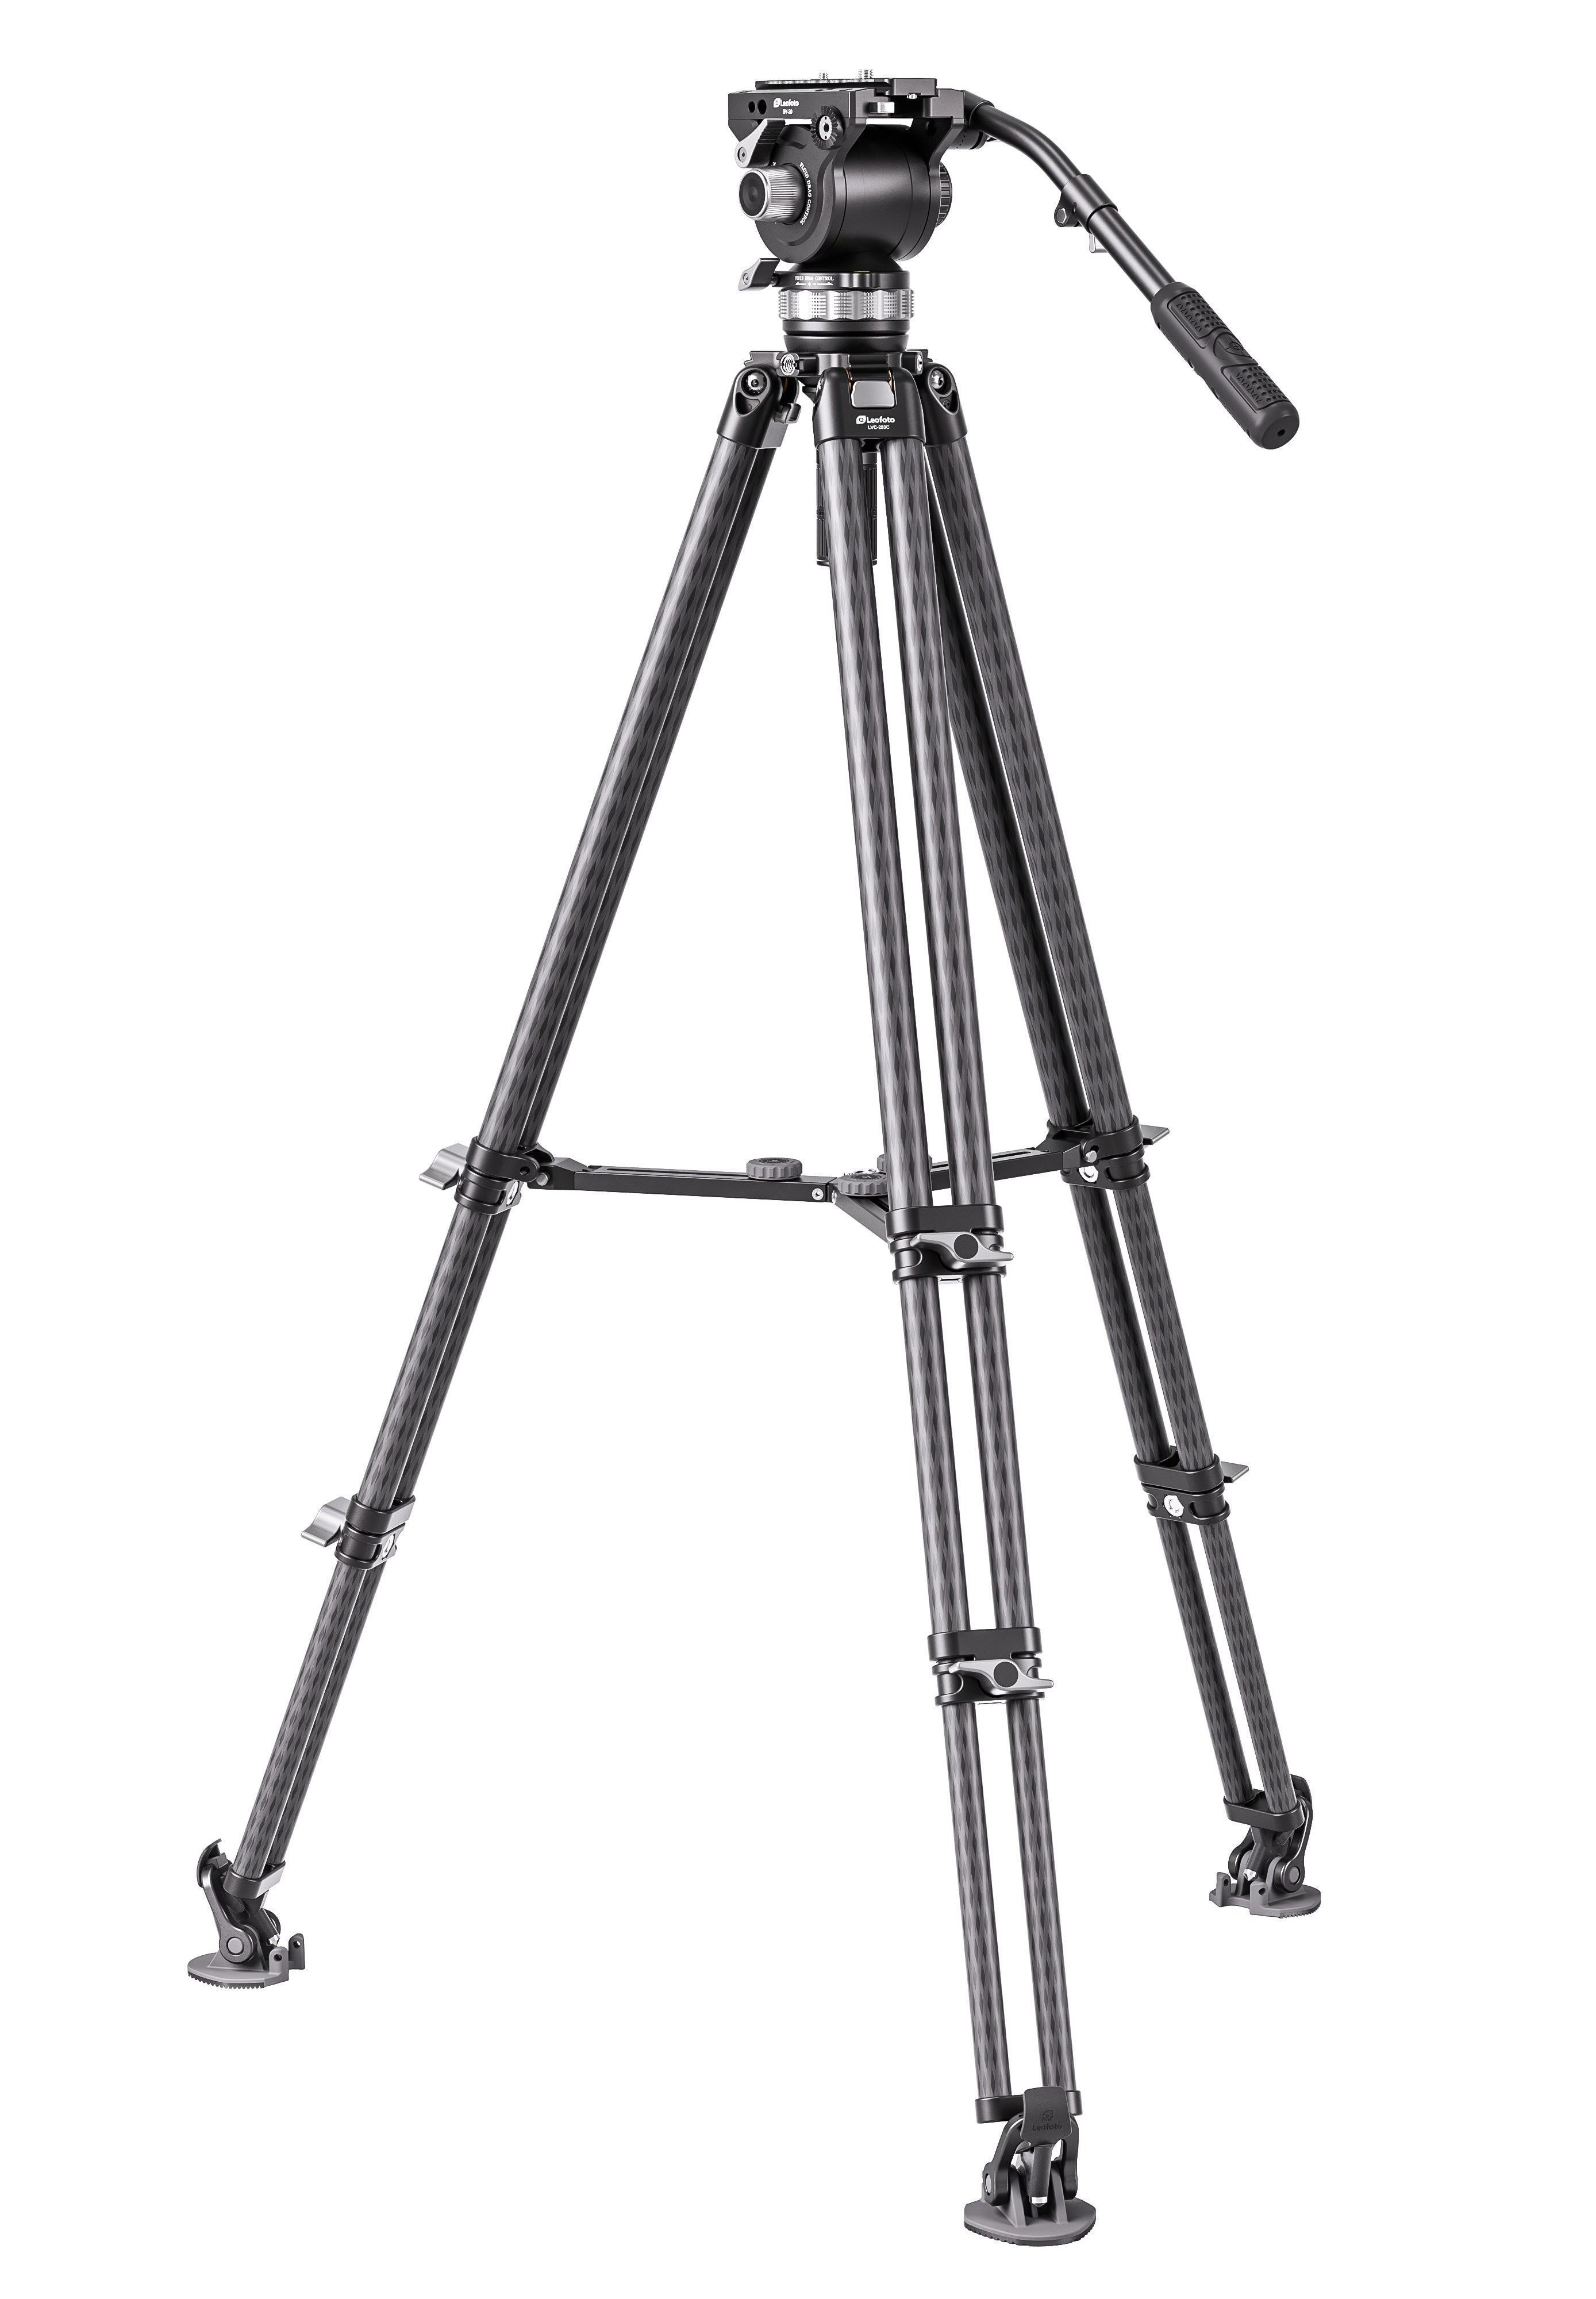 Leofoto LVC-253C+BV-20K (Knob Clamp) Dual-Tube Video Tripod with Fluid Head Set  | 75mm Integrated Bowl with Leveling Base and Handle